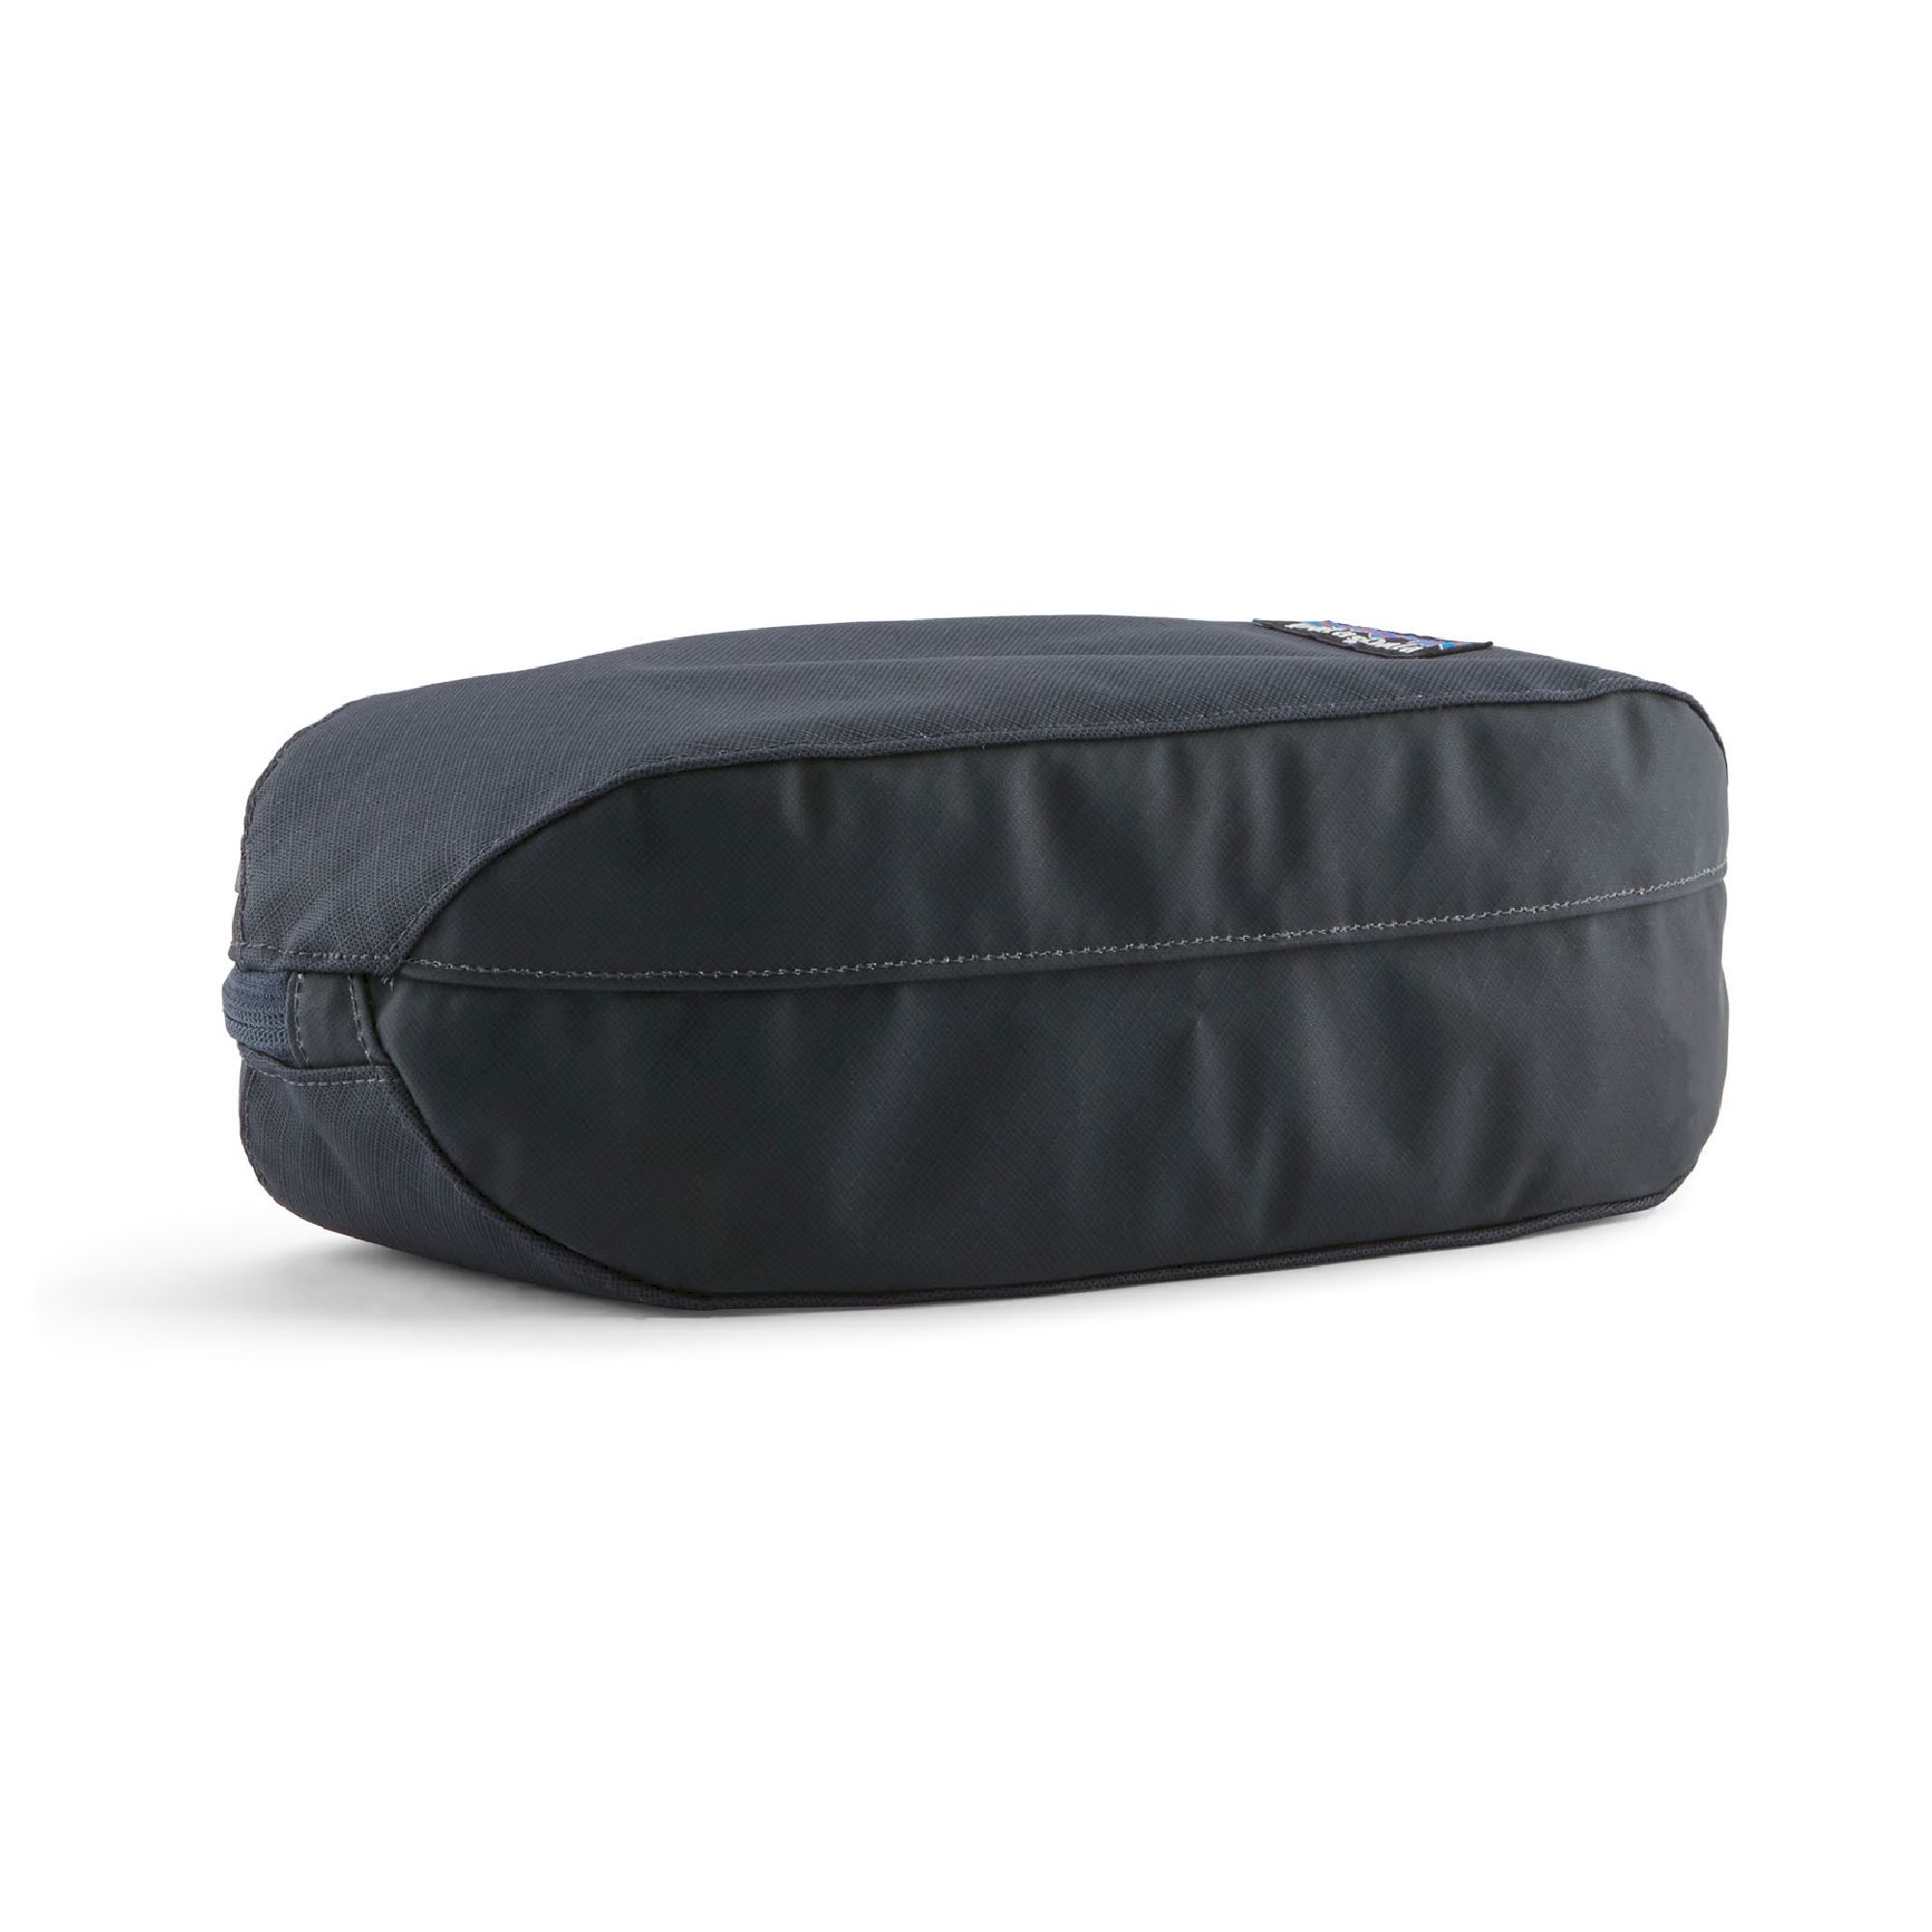 Patagonia Black Hole Cube - Small - Packing Cube | Hardloop